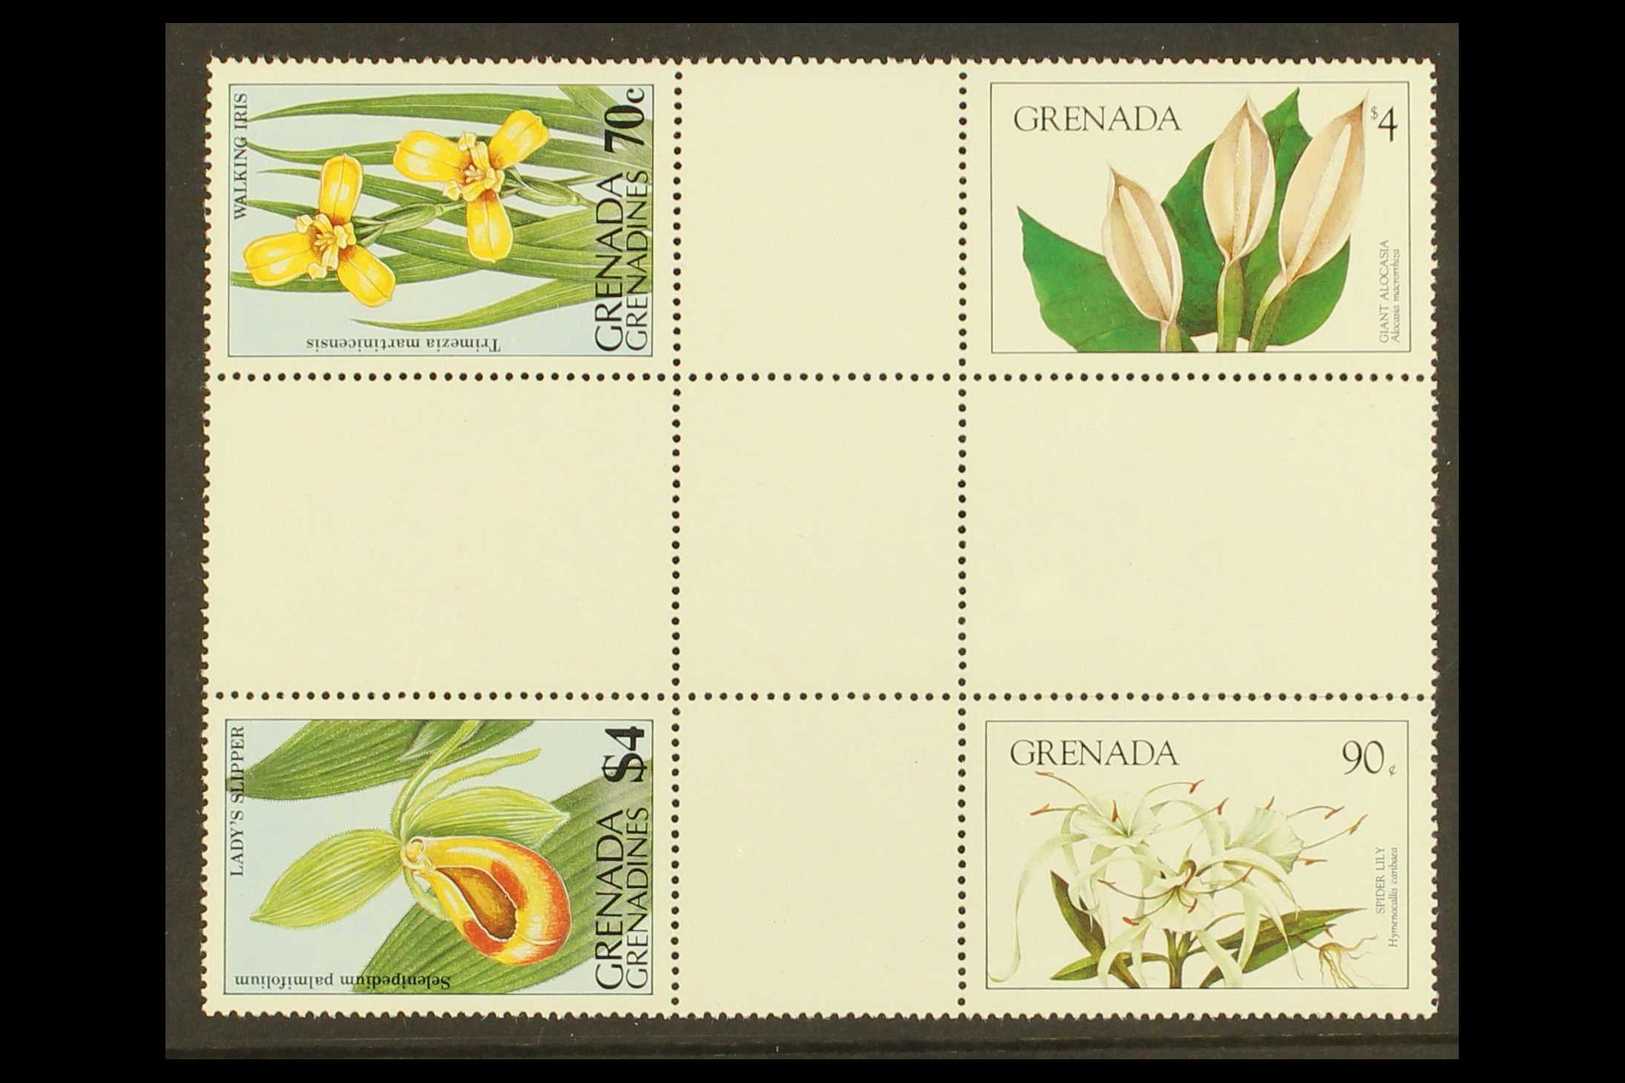 FLOWERS - RARE CROSS GUTTER BLOCK OF FOUR Grenada 1984 Flowers 90c (Spider Lily) And $4 (Giant Alocosa), SG 1331/1332, T - Ohne Zuordnung